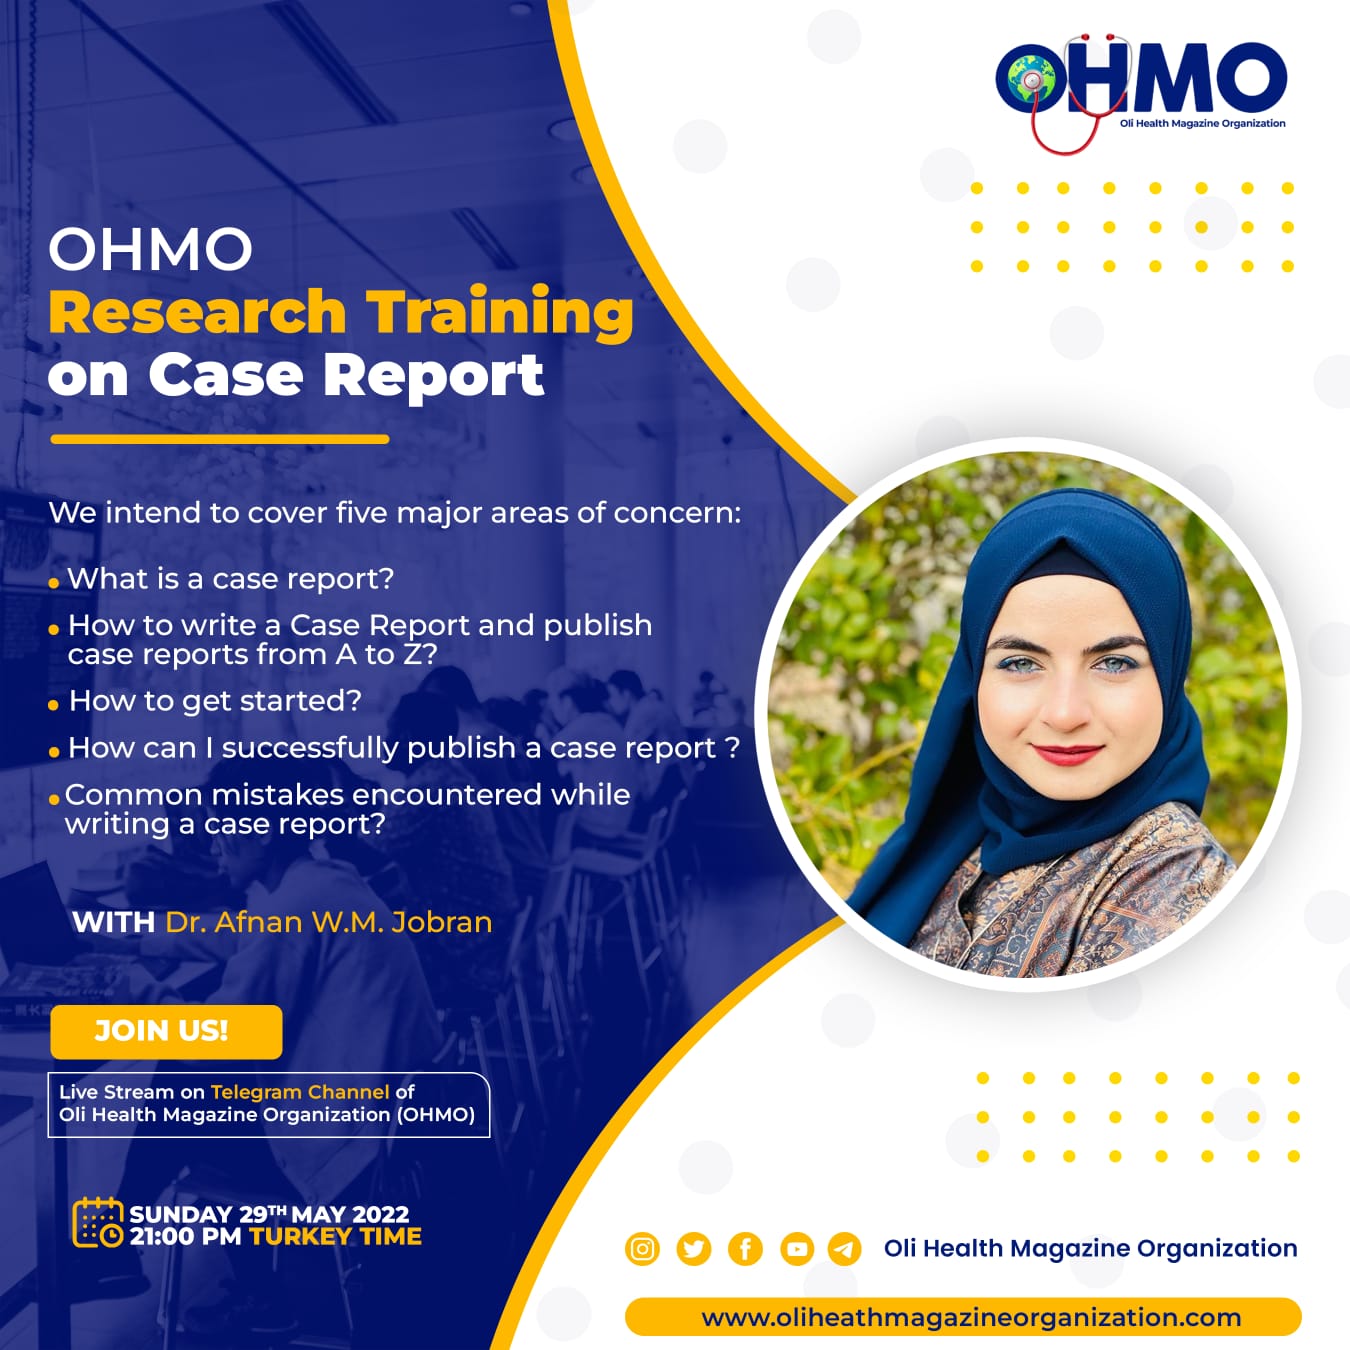 OHMO Research Training on Case Report